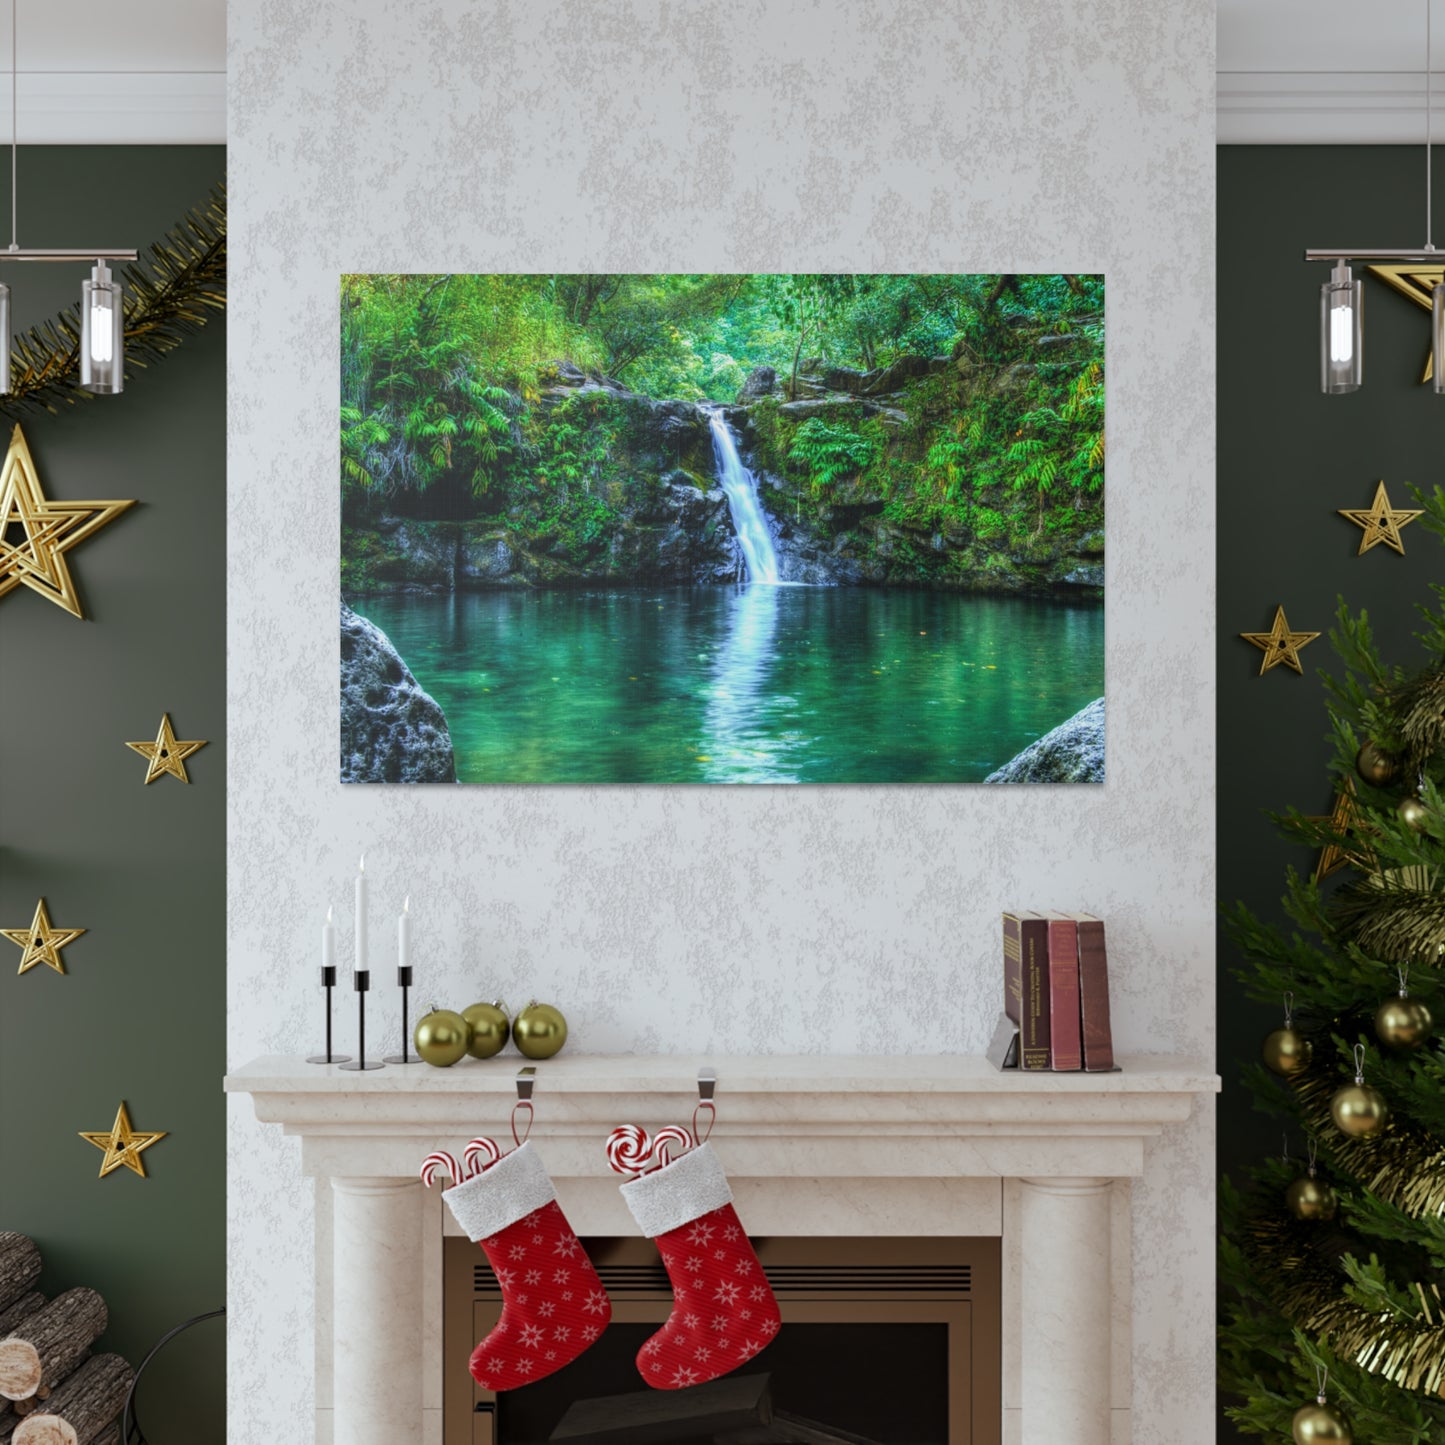 Canvas Print Of Waterfall In Hawaii For Wall Art